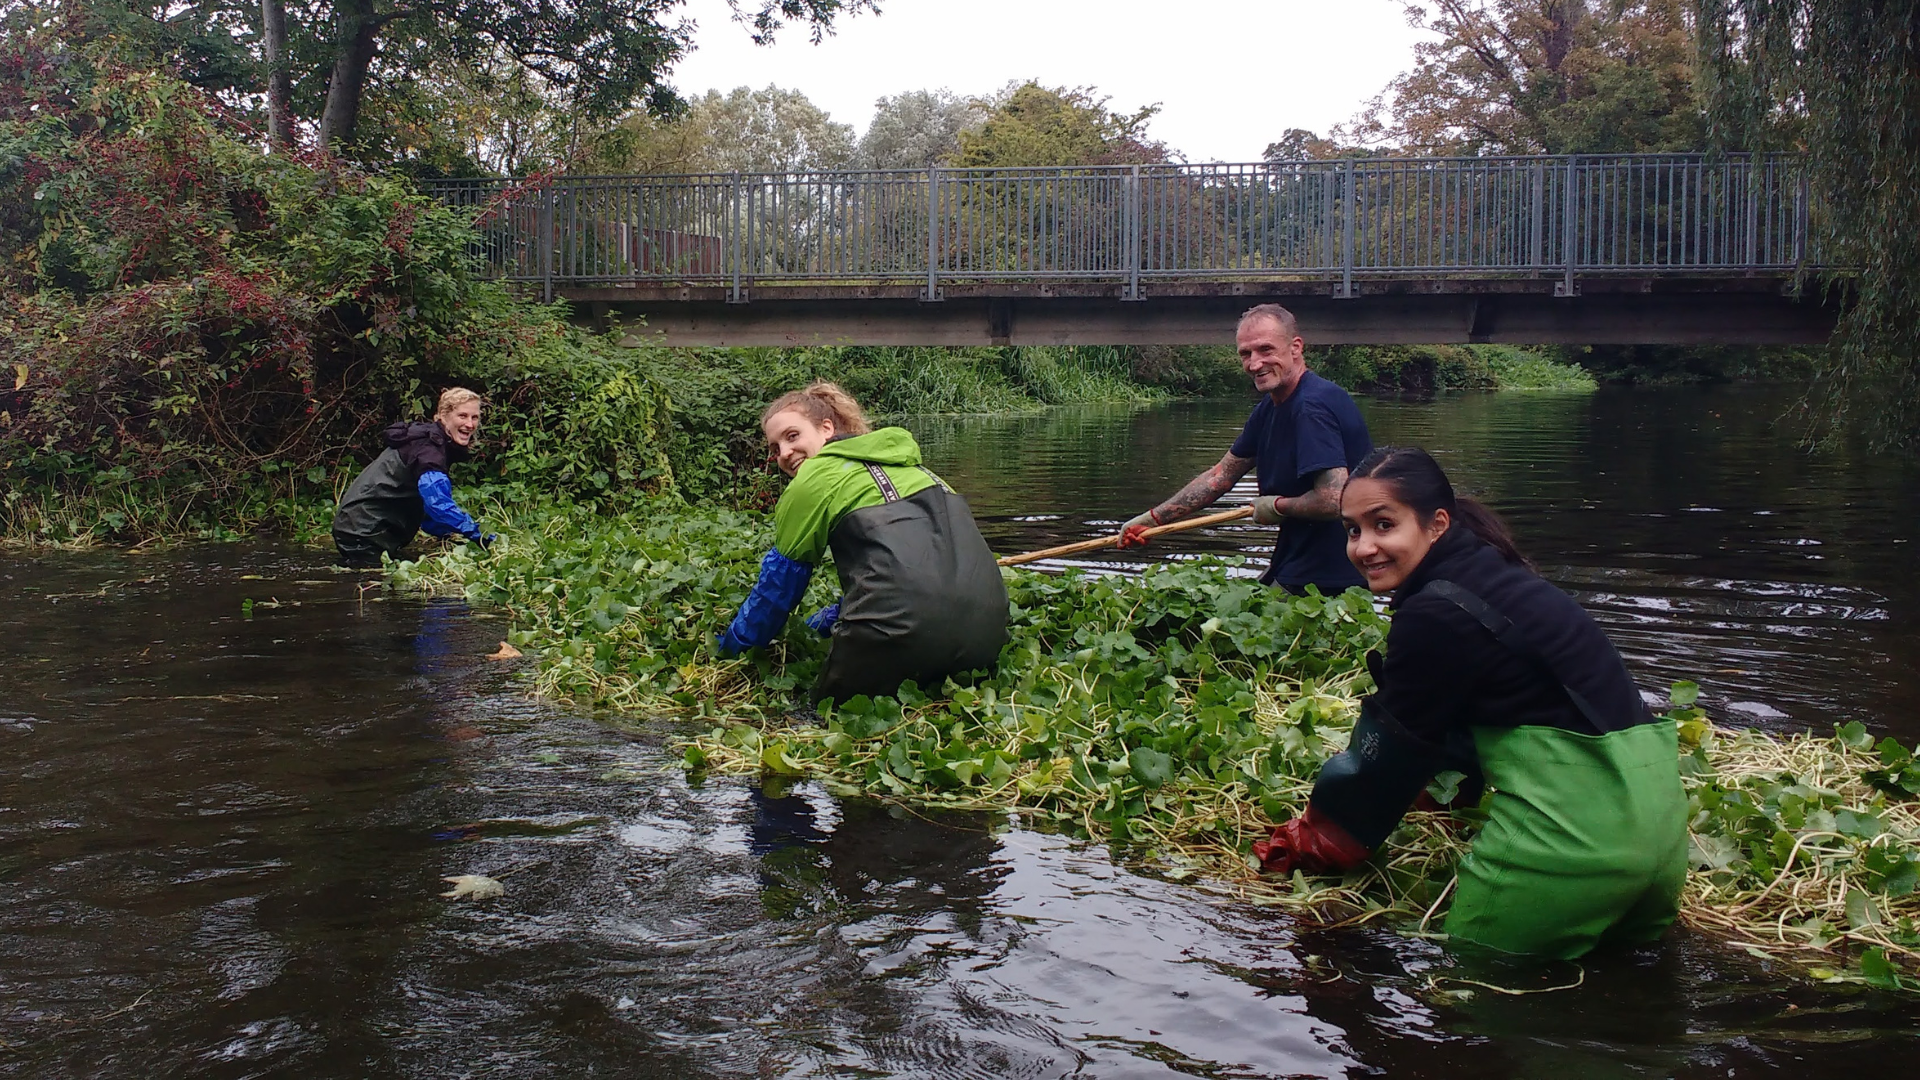 A group of people clearing a river